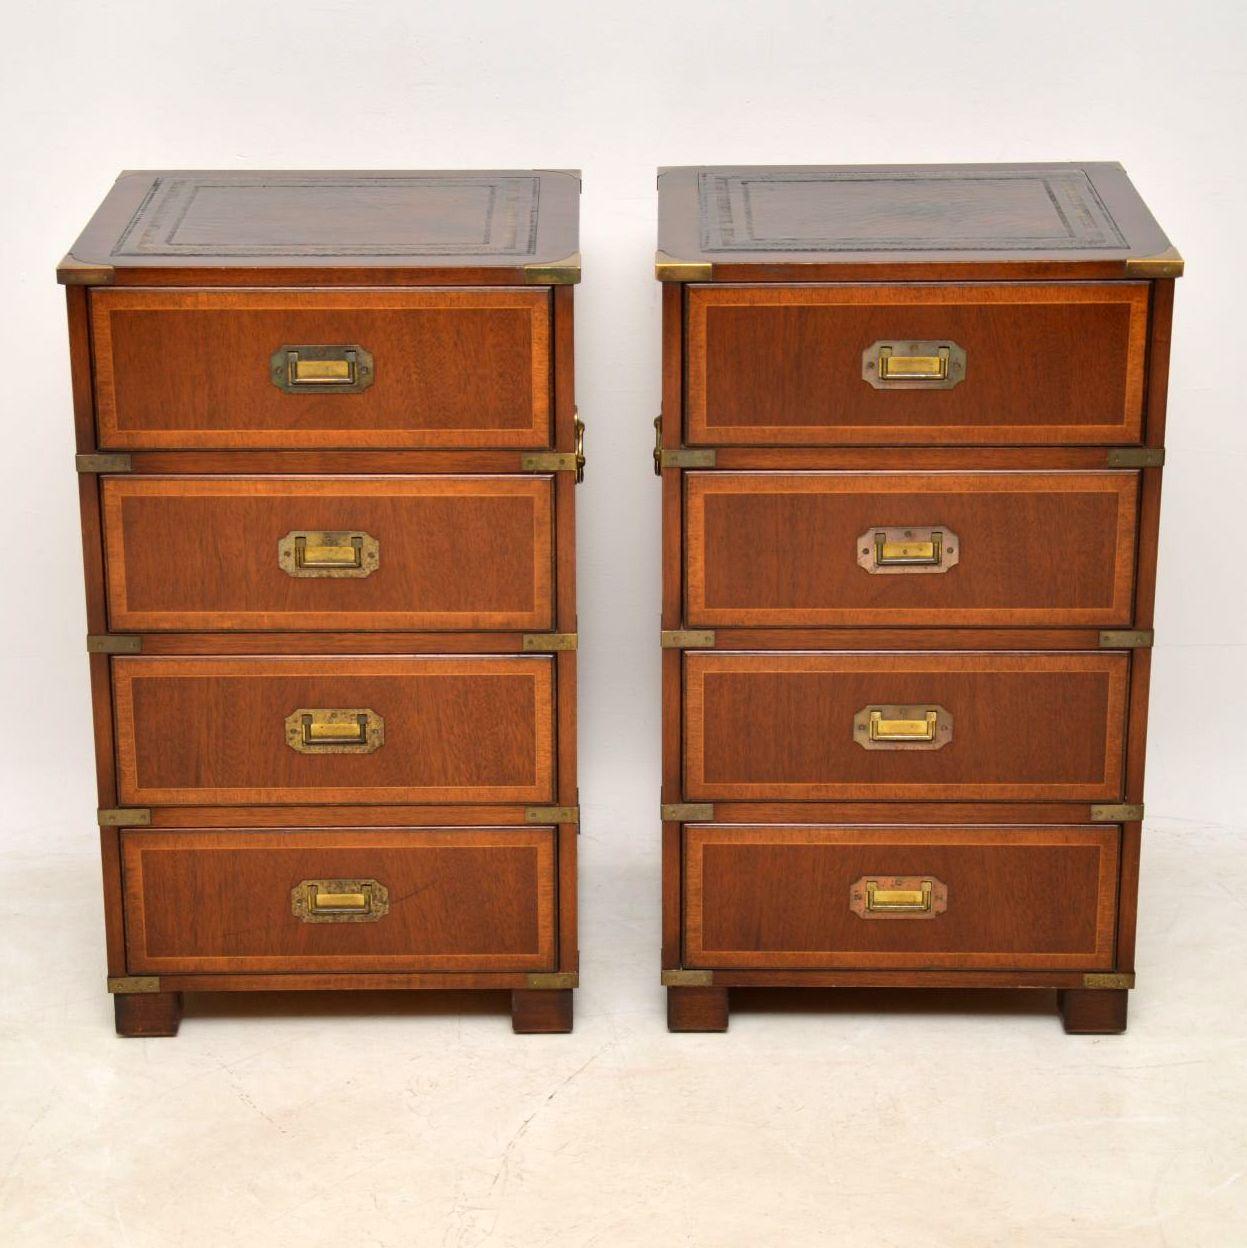 This pair of antique military style bedside chests in mahogany are good quality and have some fine features. They are in good condition, having just been polished and date to around the 1950s period. The tops have tooled leather inserts which have a